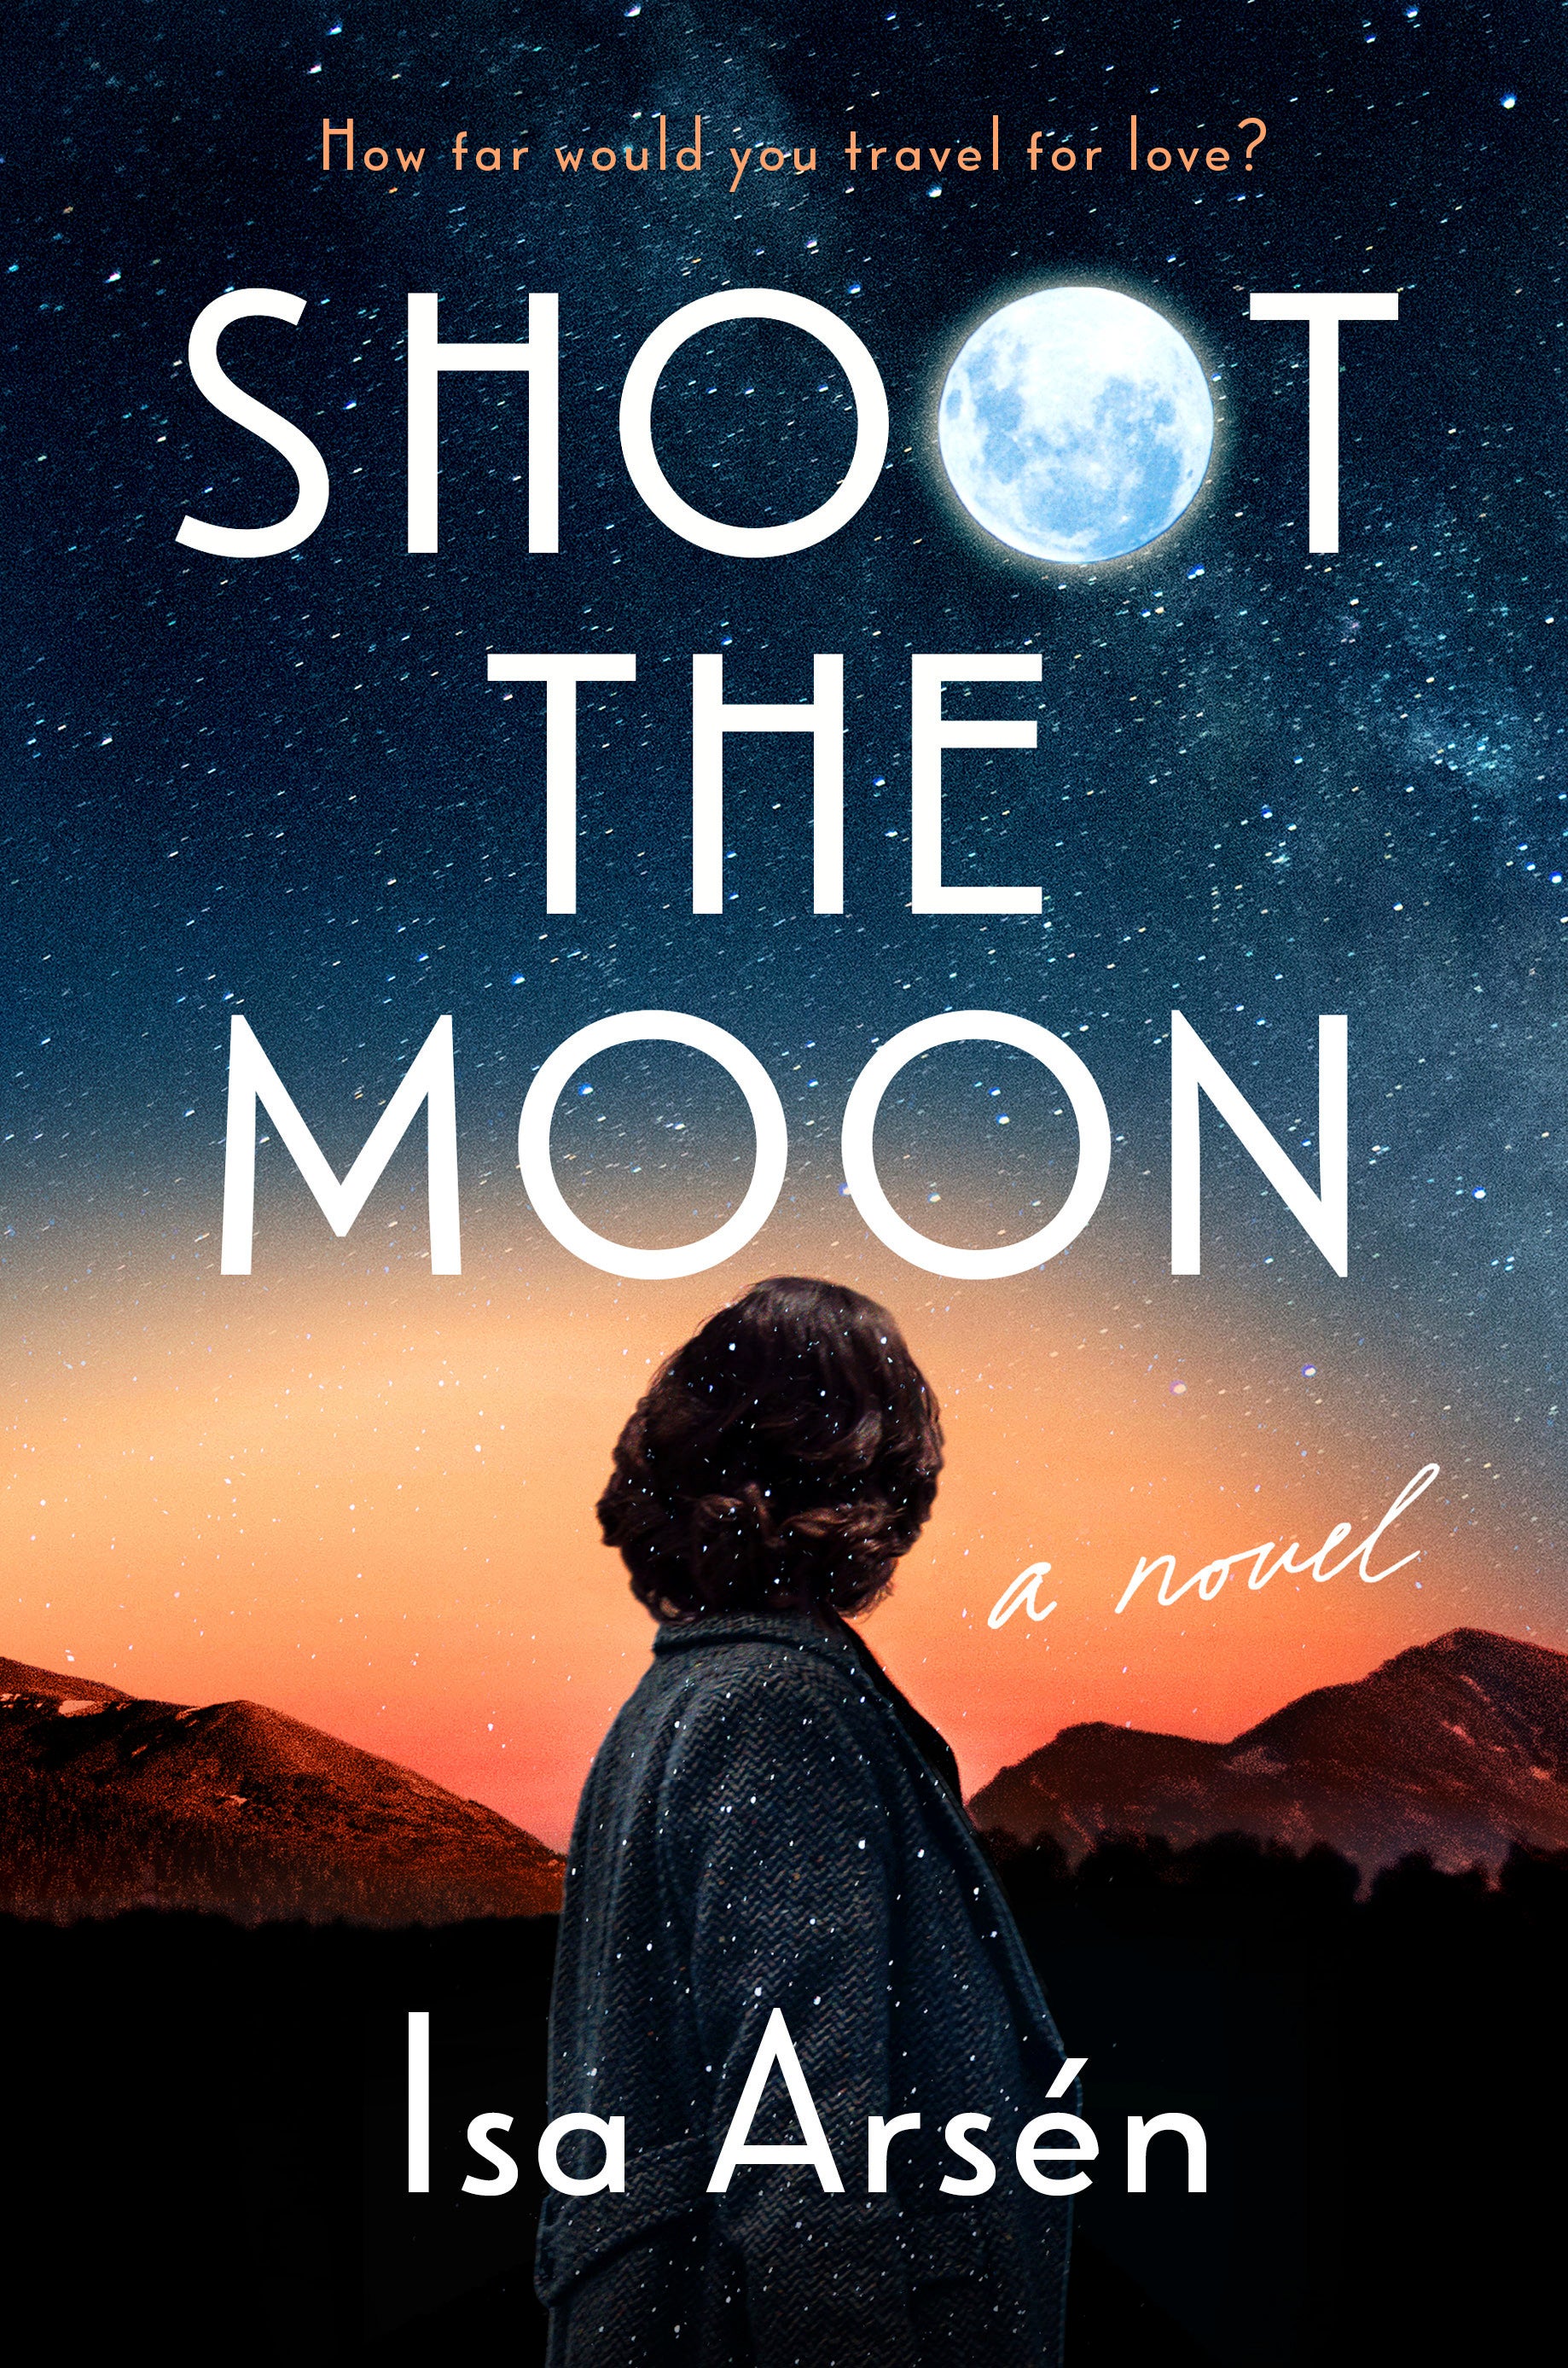 Book Review - Shoot the Moon